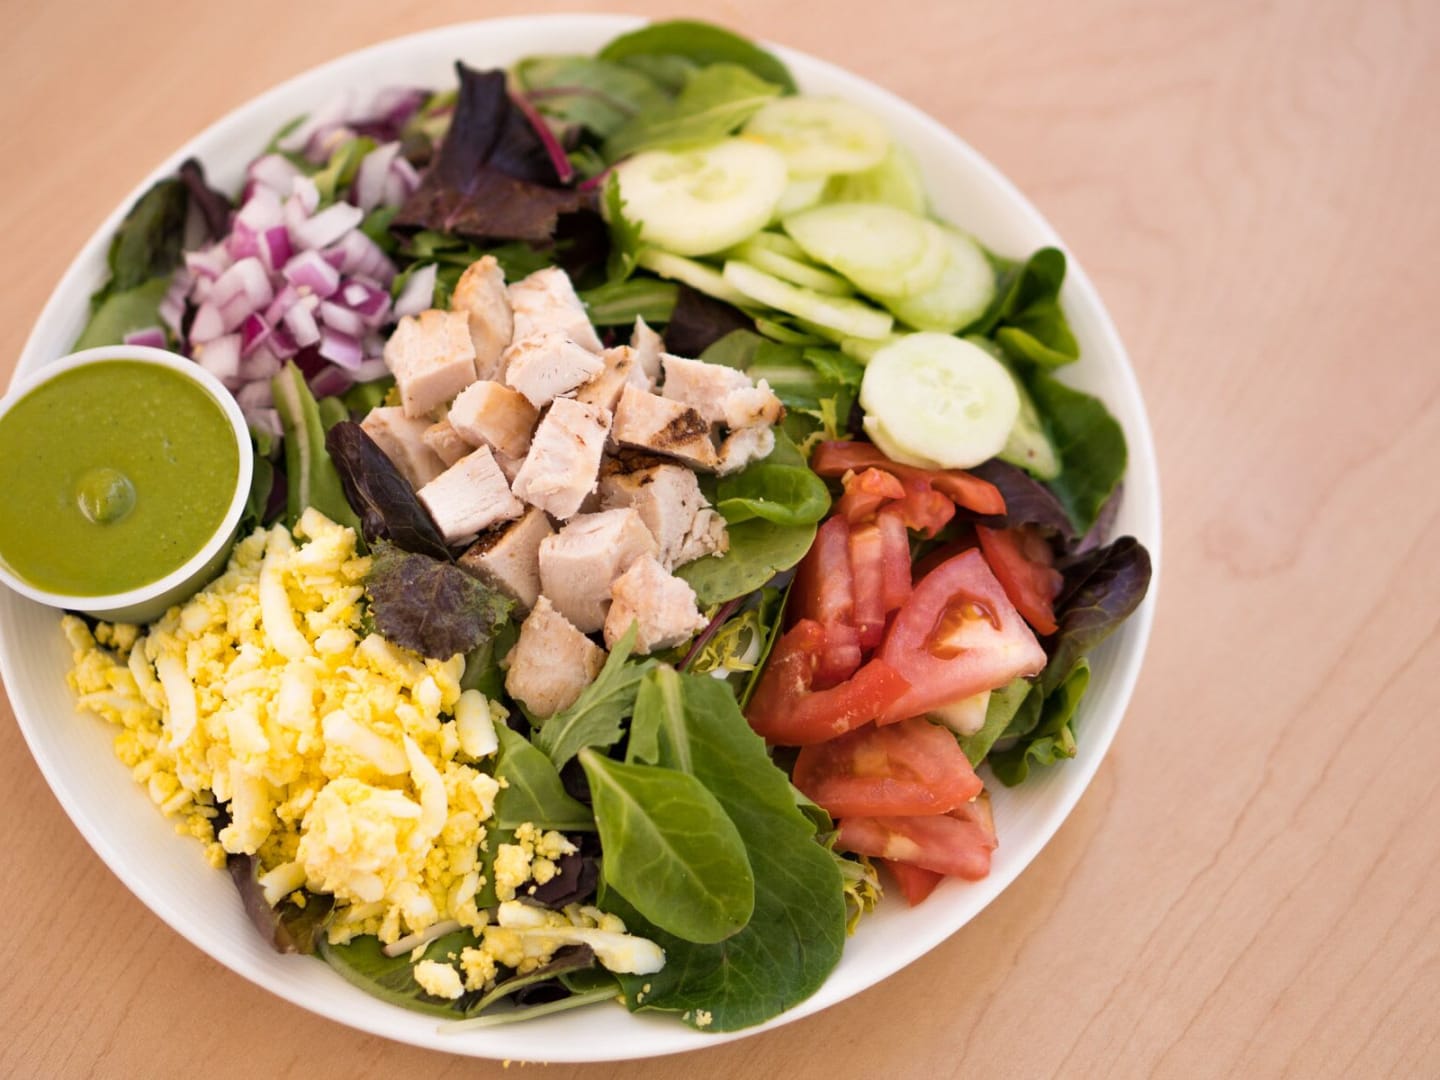 Salad with eggs, turkey, cucumbers, onions and a green vinaigrette dressing in a white bowl